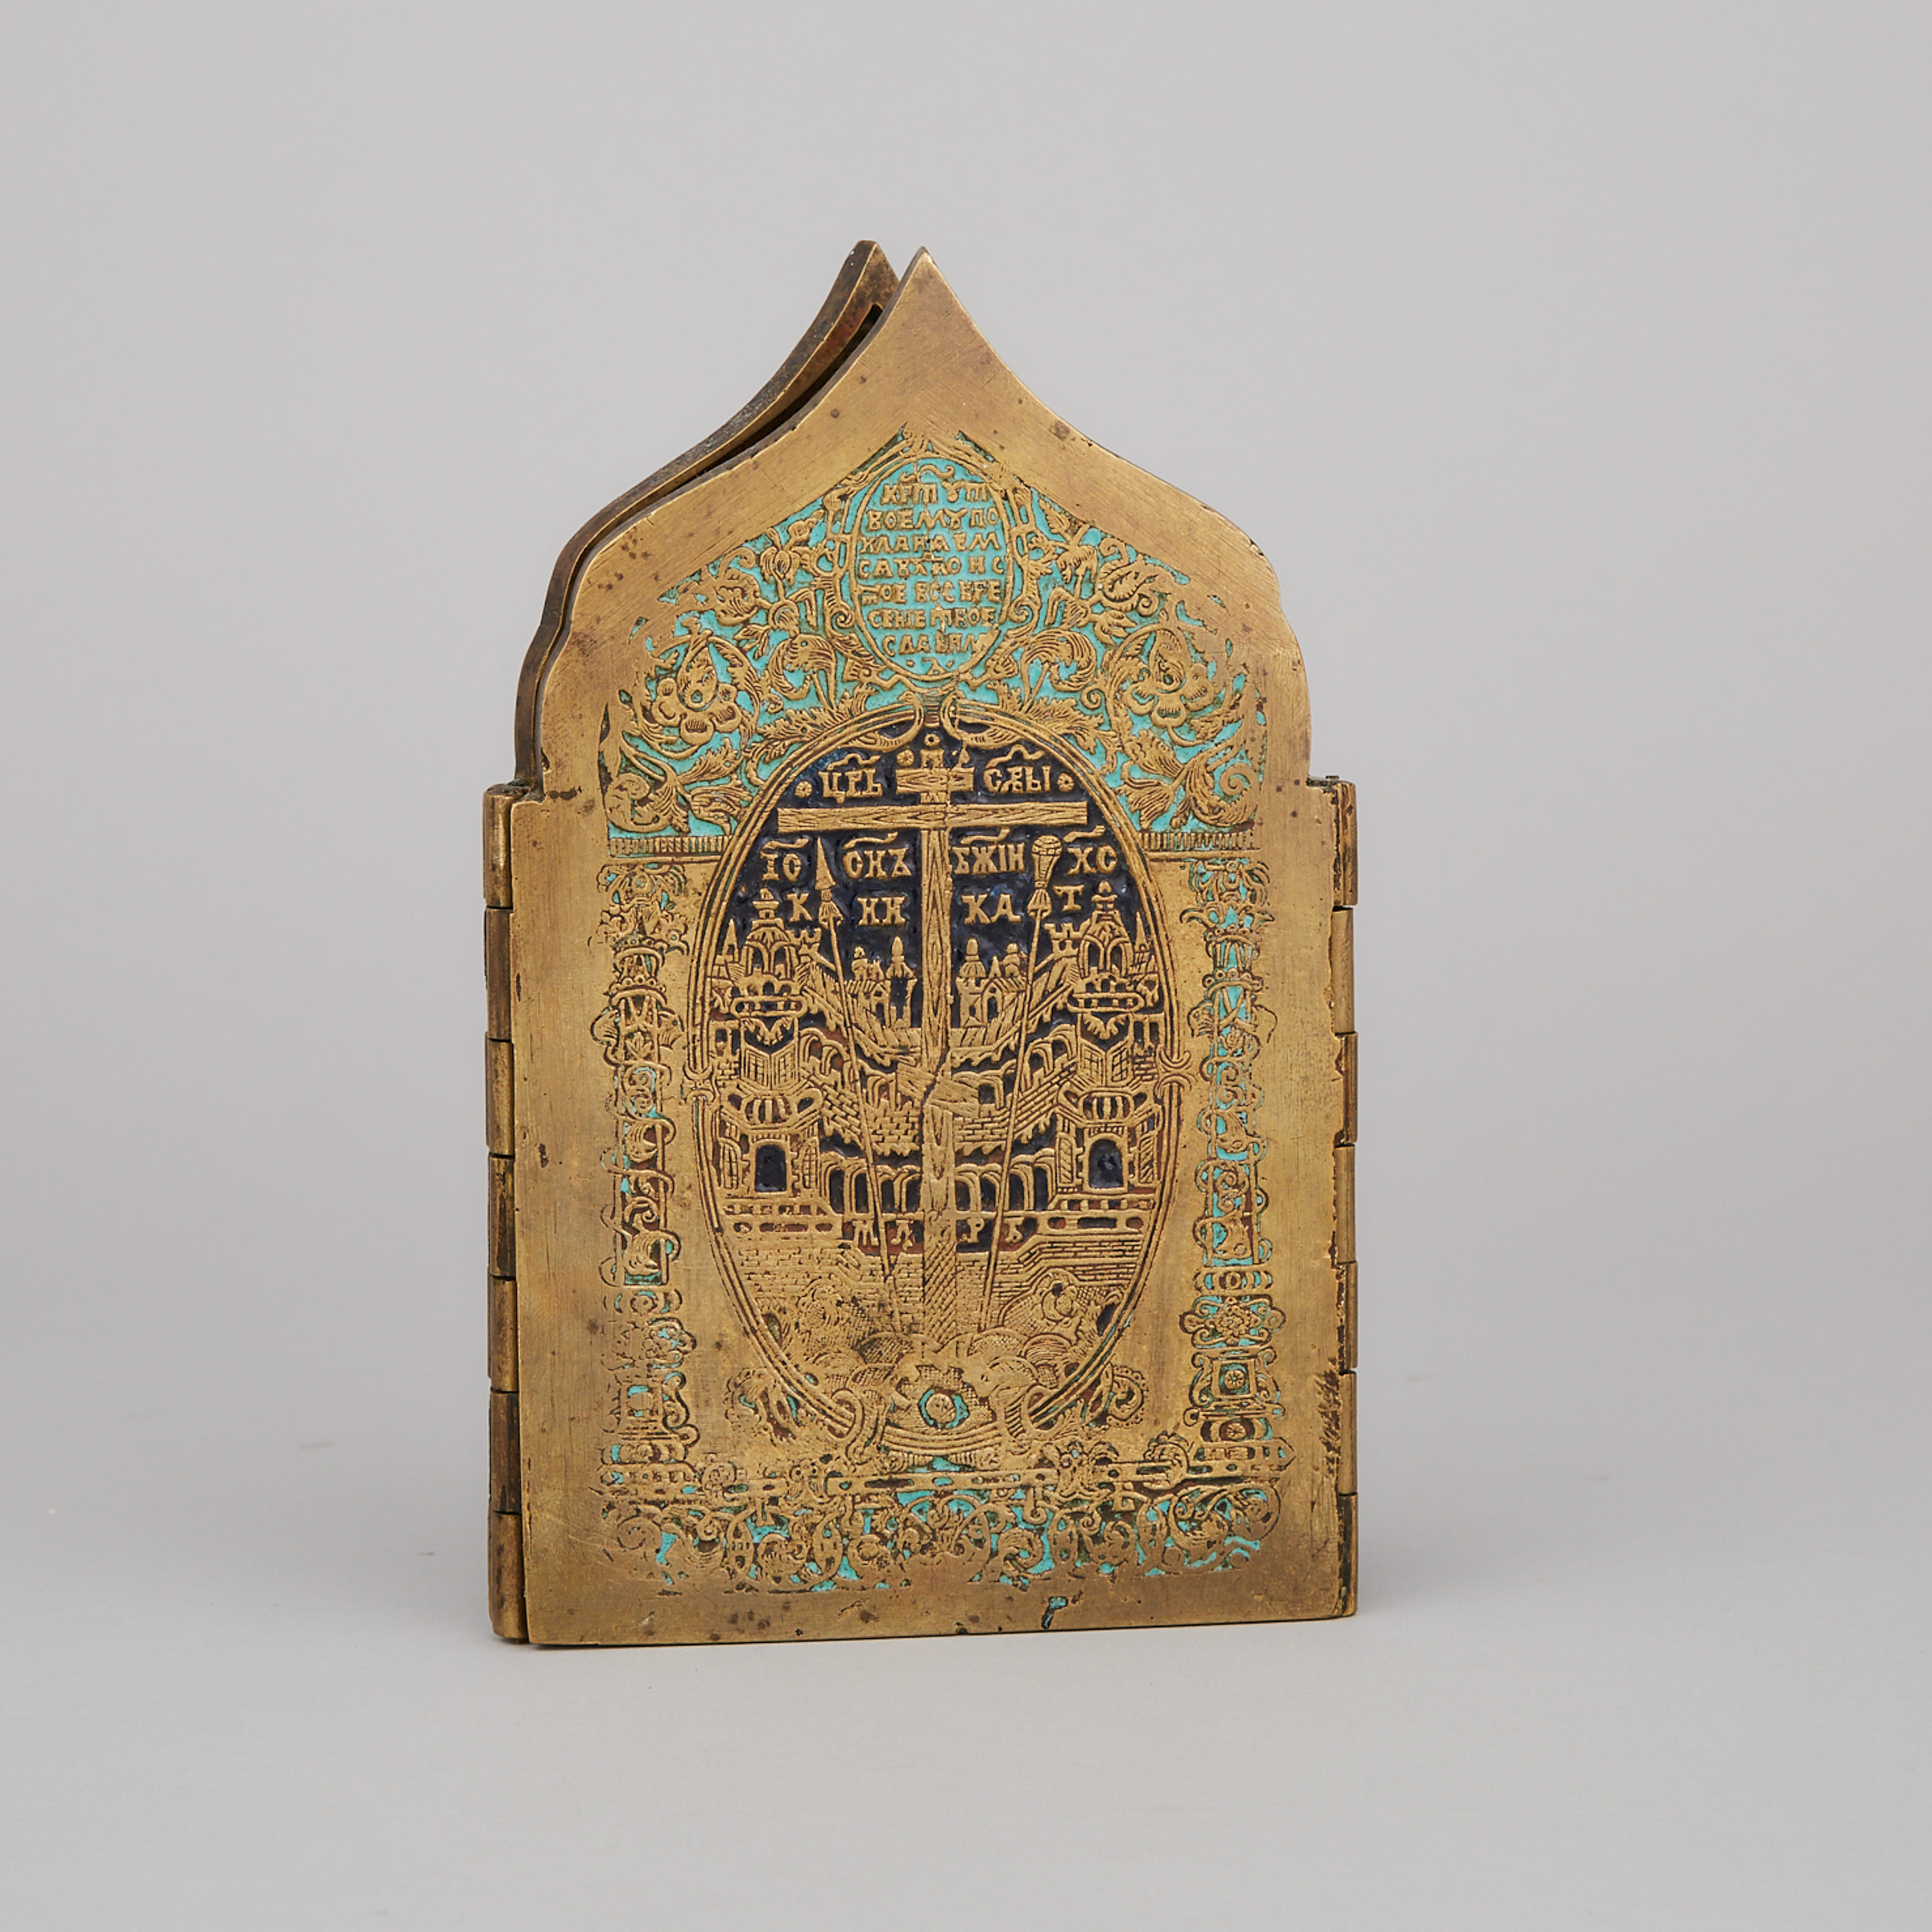 Russian Orthodox Gilt and Enamelled Bronze Quadriptych Travelliing Icon, late 18th/early 19th century 